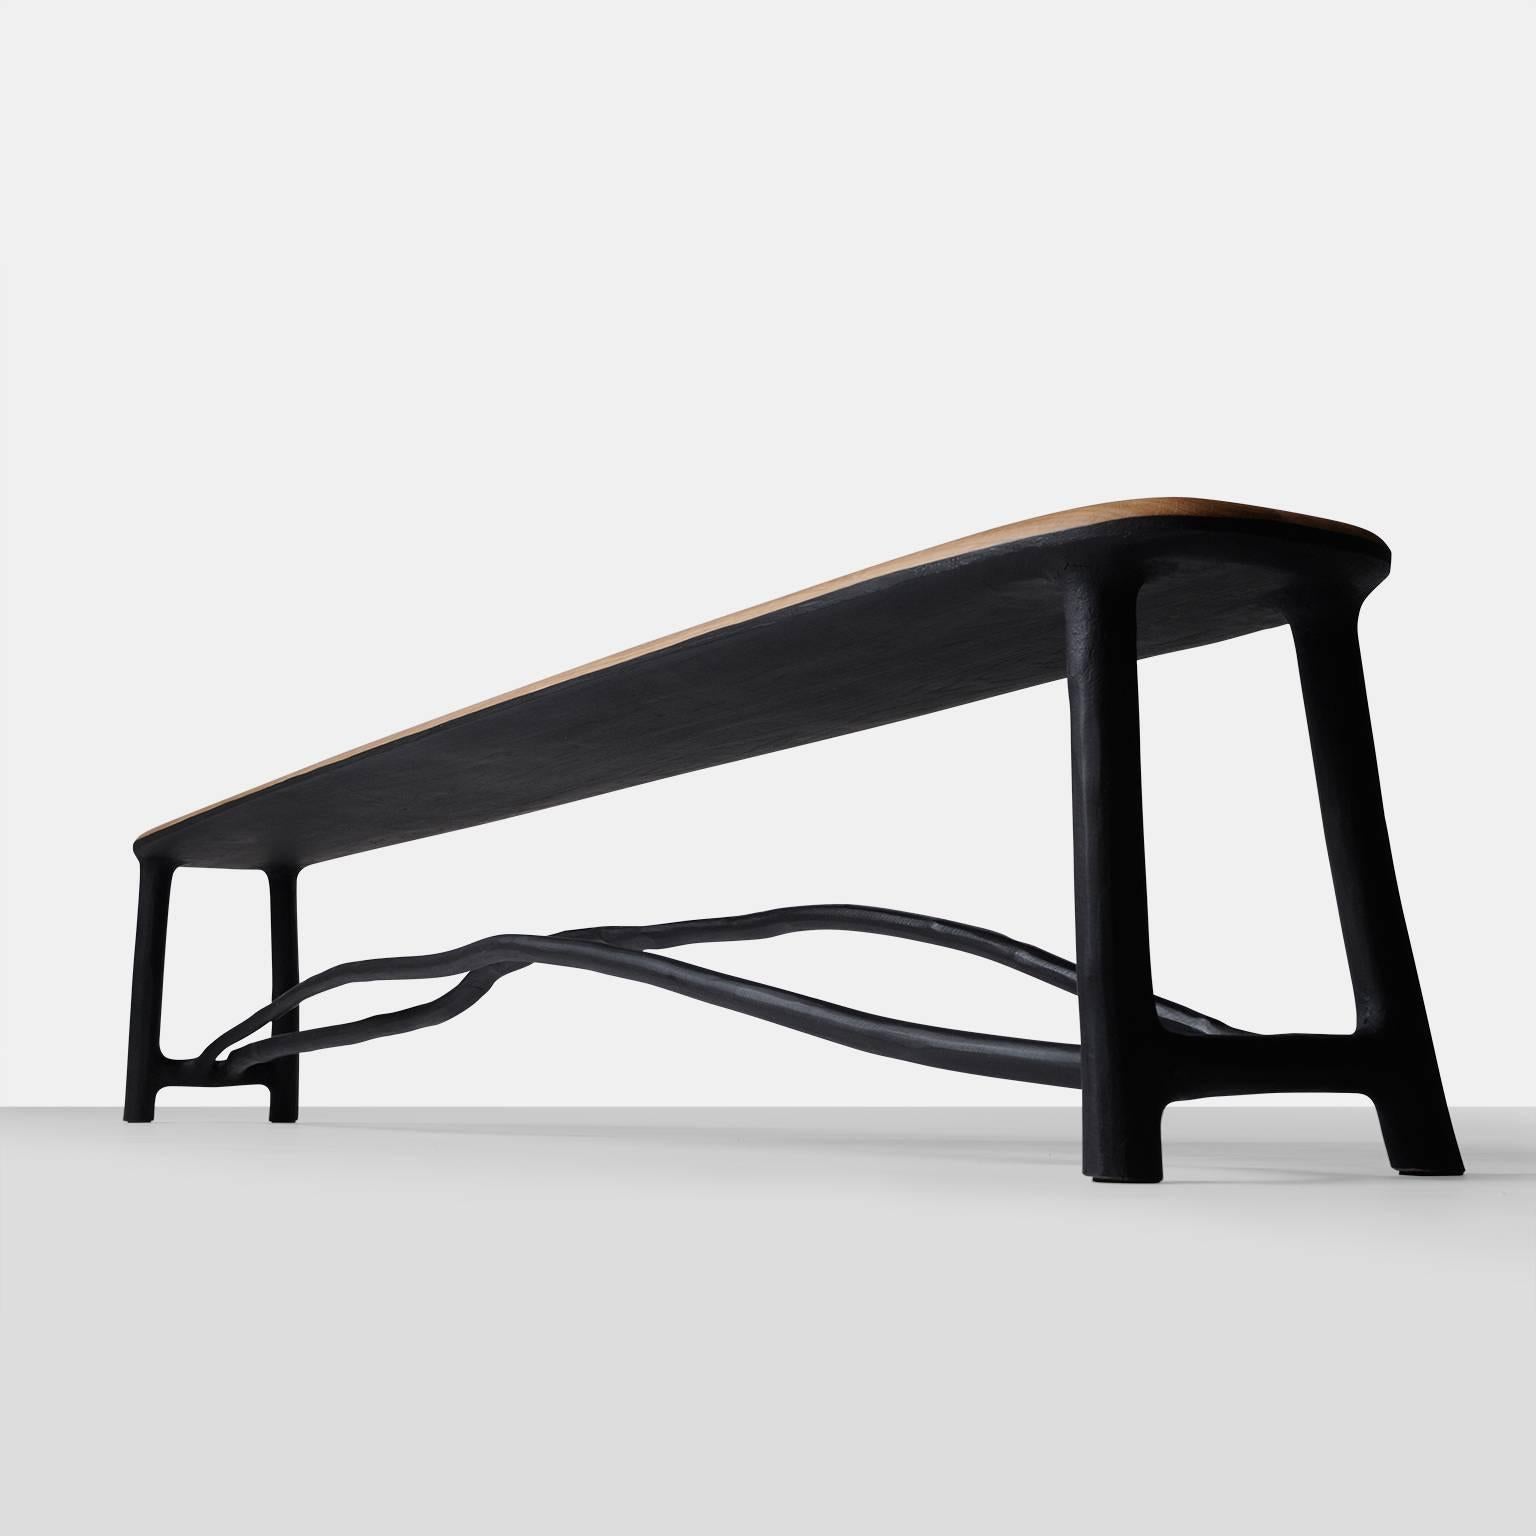 A very long and elegantly proportioned bench with a frame of naturally shaped hazel branches in a blackened finish while the seat is in oak. Each piece is completely handmade by Valentin Loellmann and all are signed and numbered.  With all custom